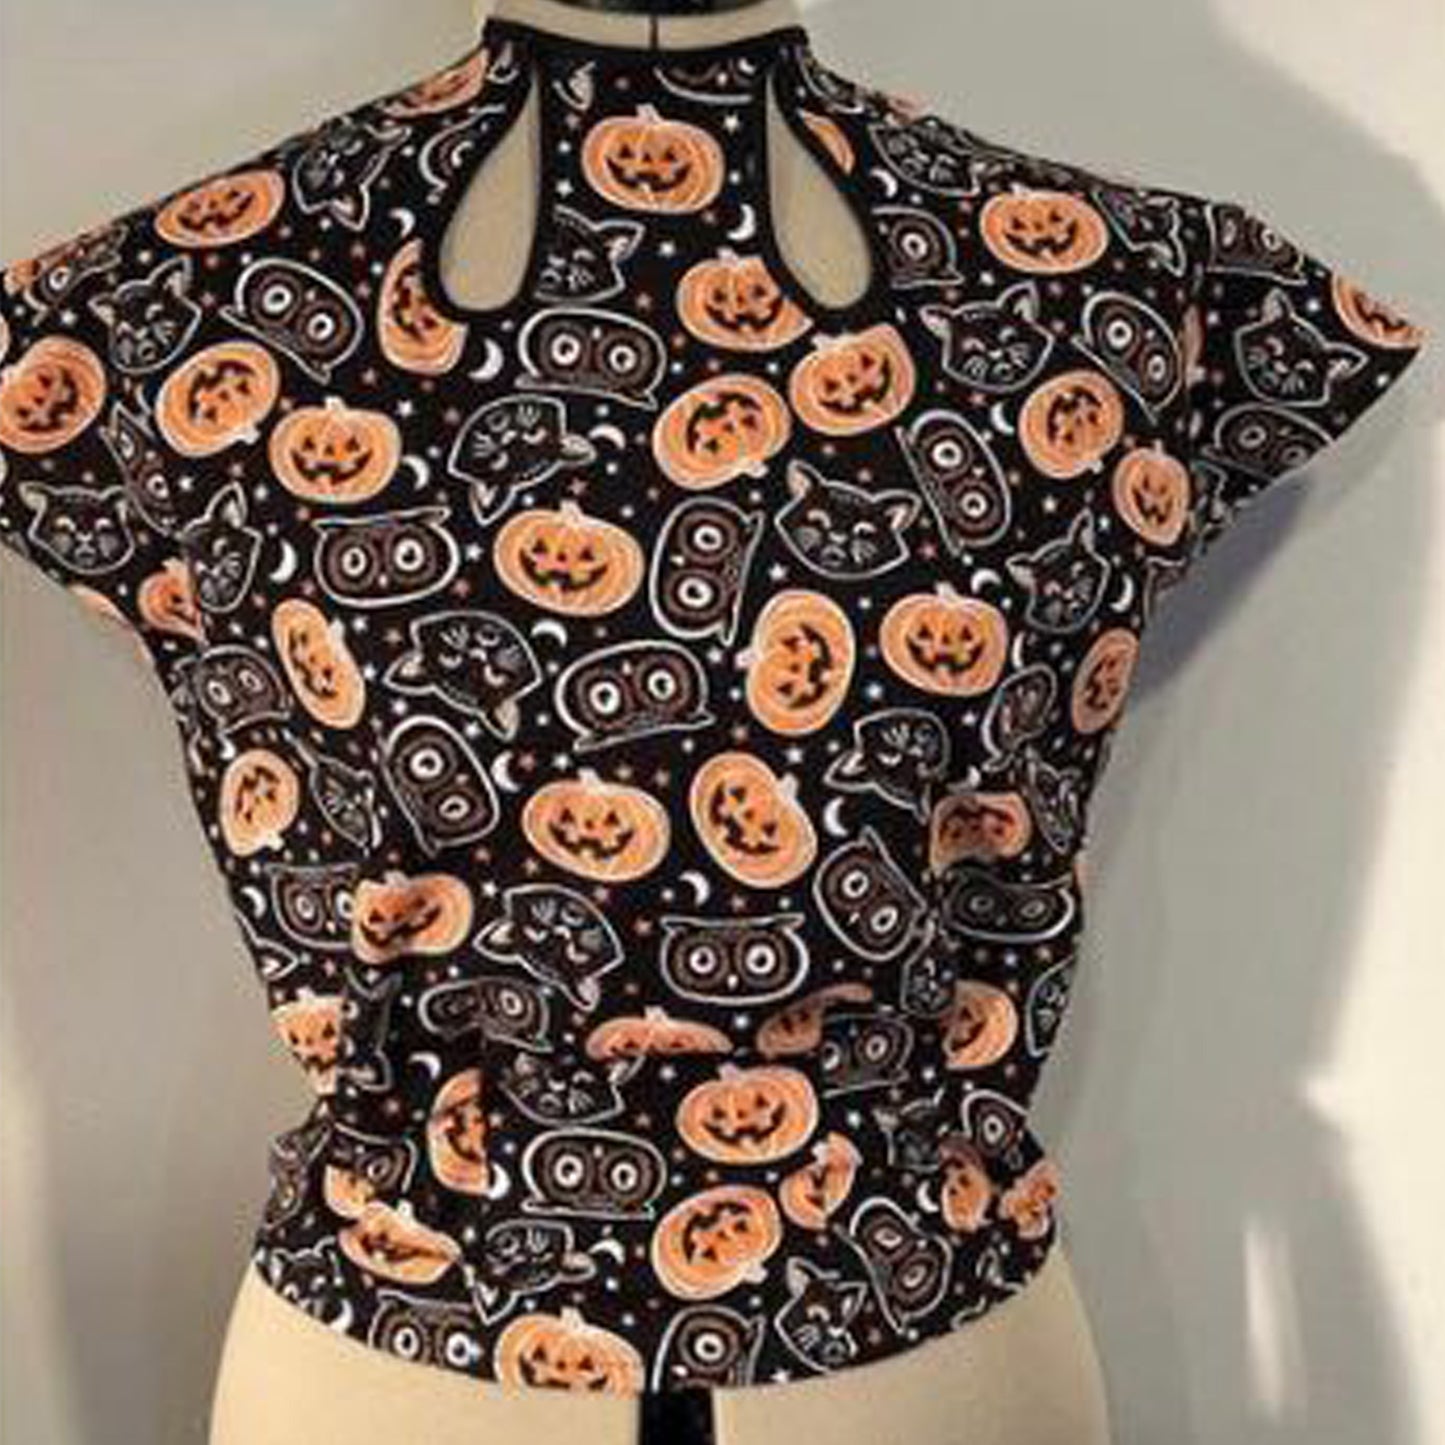 Blouse with petal neckline made from a variation of this pattern